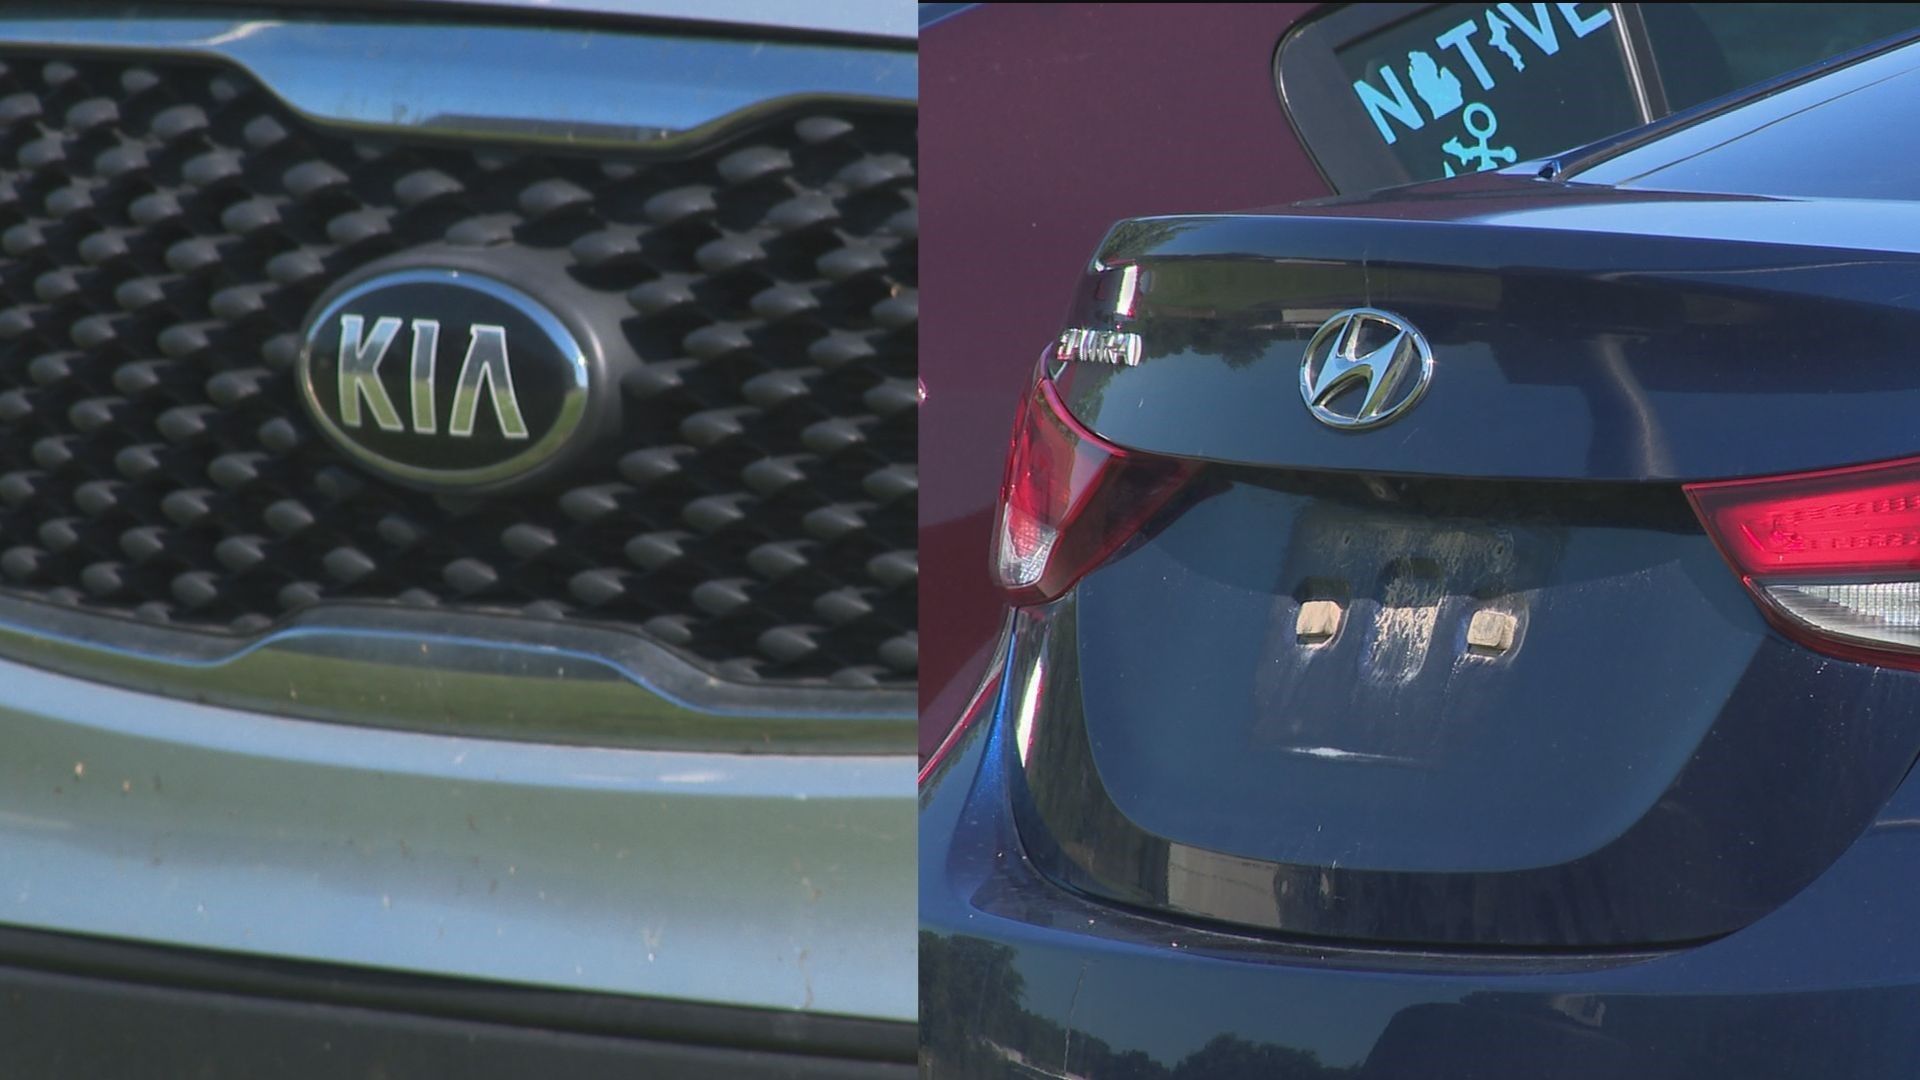 The Grand Rapids Police Department says there have been 680 stolen and attempted stolen Kia and Hyundai vehicles since May 1.